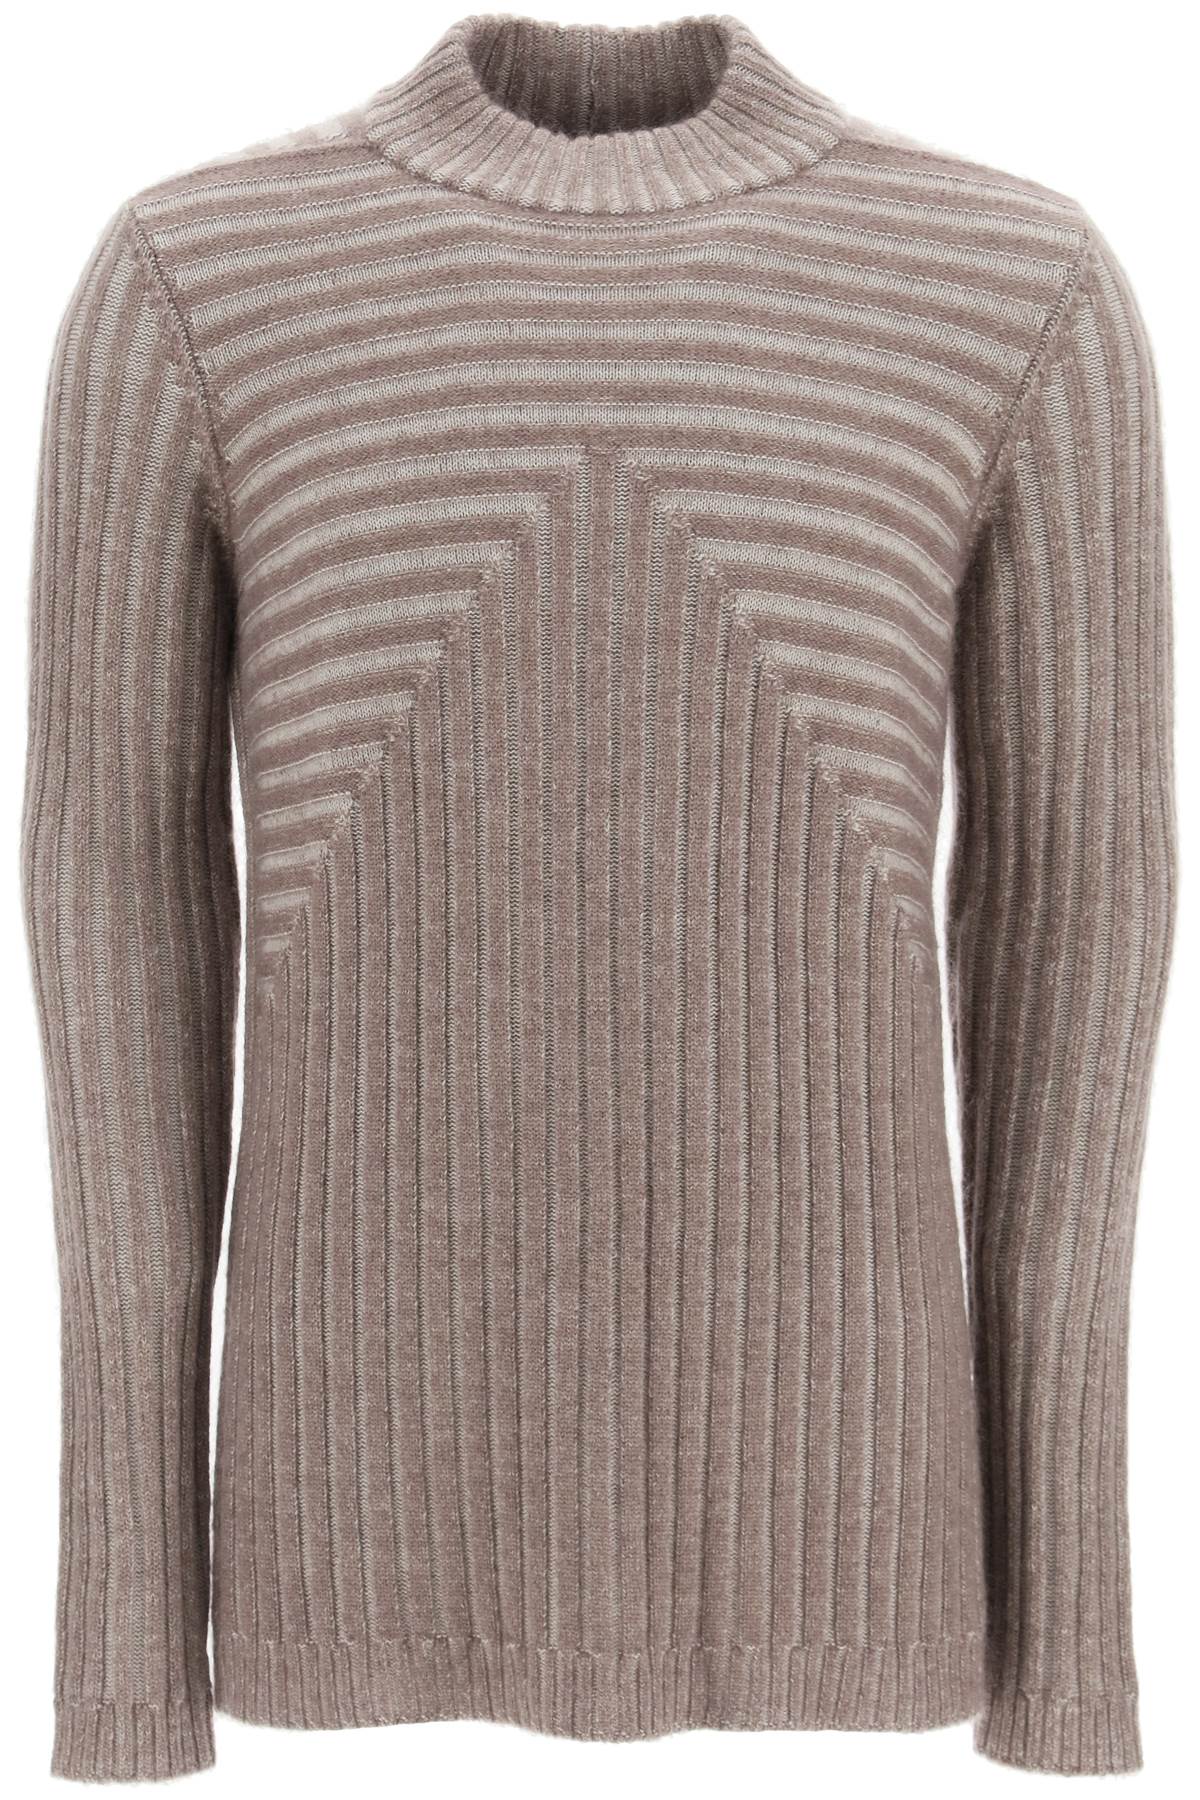 Rick Owens Ribbed Wool And Mohair Blend Sweater